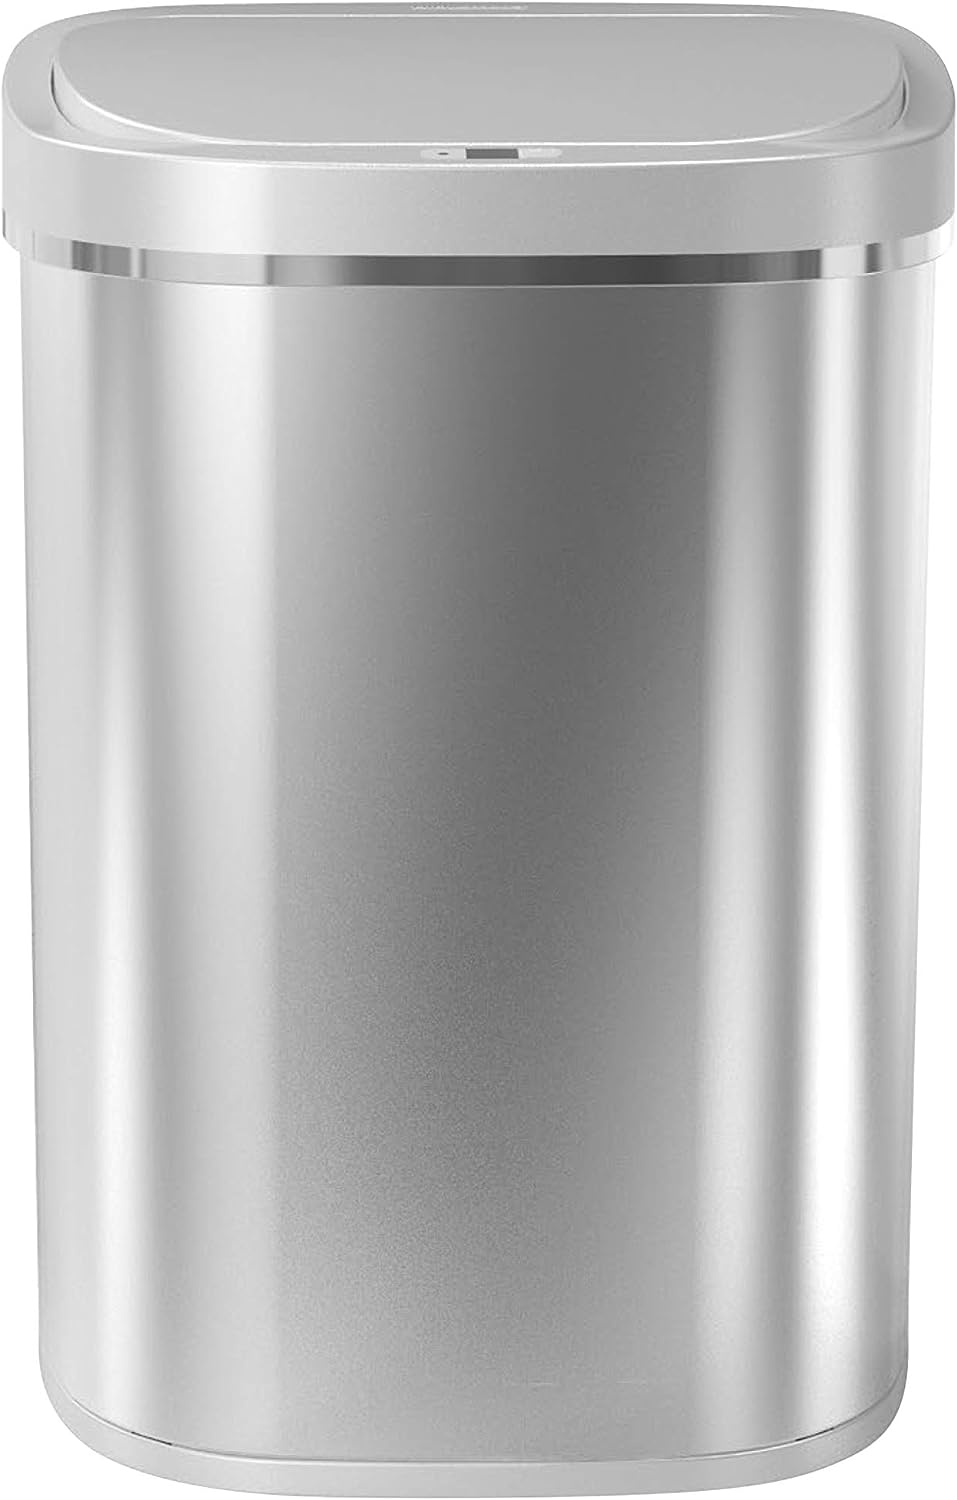 https://bigbigmart.com/wp-content/uploads/2023/10/NINESTARS-DZT-80-35-Automatic-Touchless-Infrared-Motion-Sensor-Trash-Can-21-Gal-80L-Heavy-Duty-Stainless-Steel-Base-Oval-Silver-Brush-Lid-Trashcan-SS4.jpg